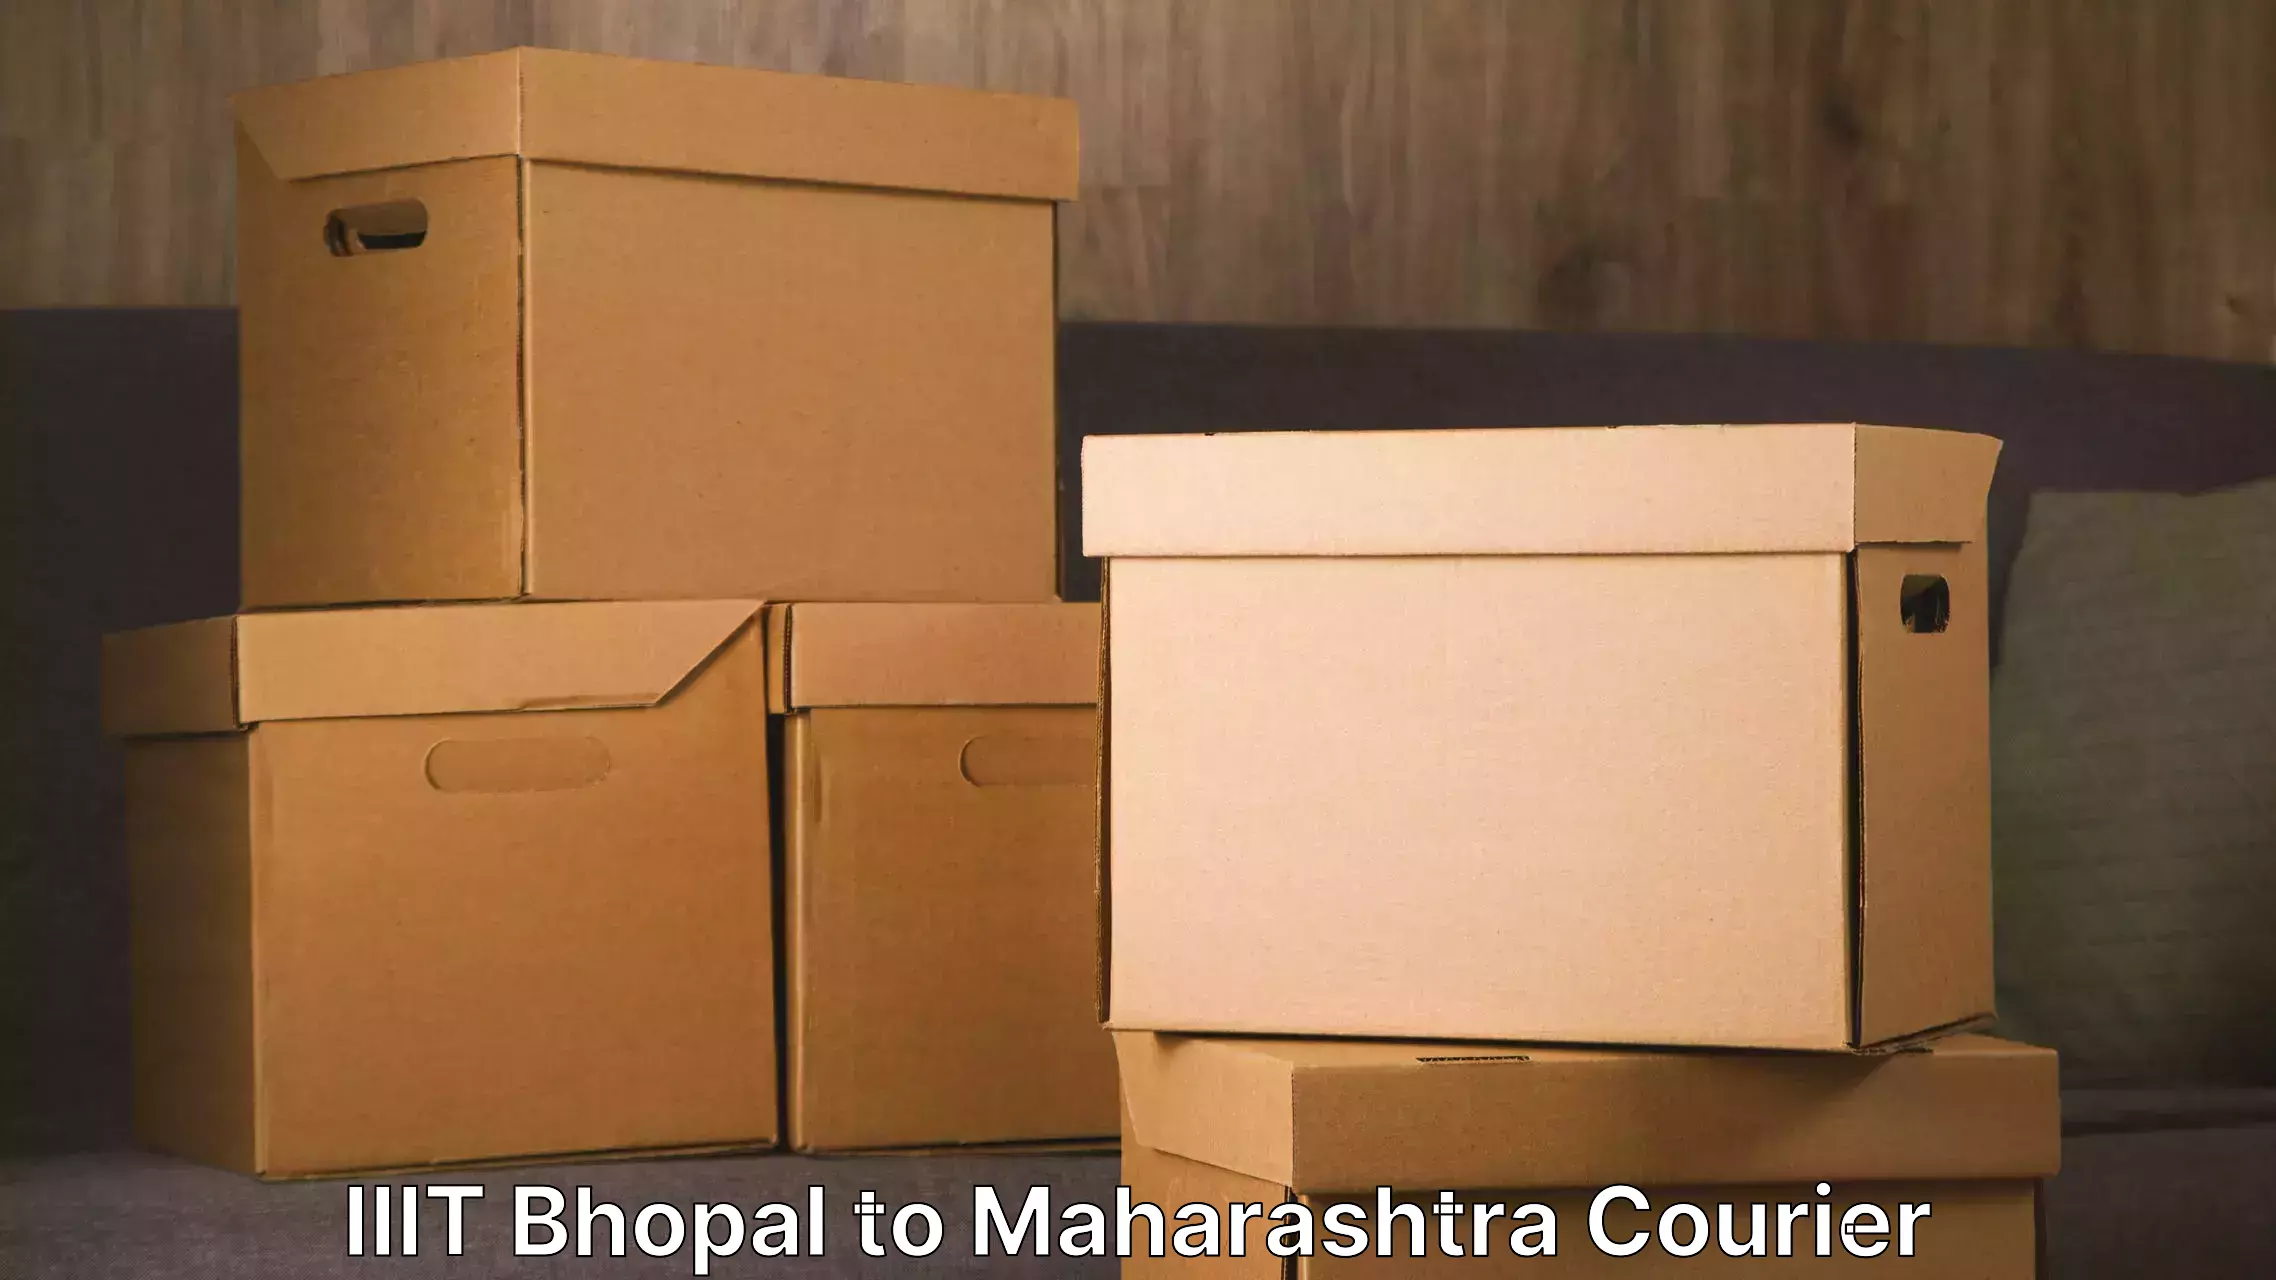 Trusted moving company IIIT Bhopal to Ulhasnagar